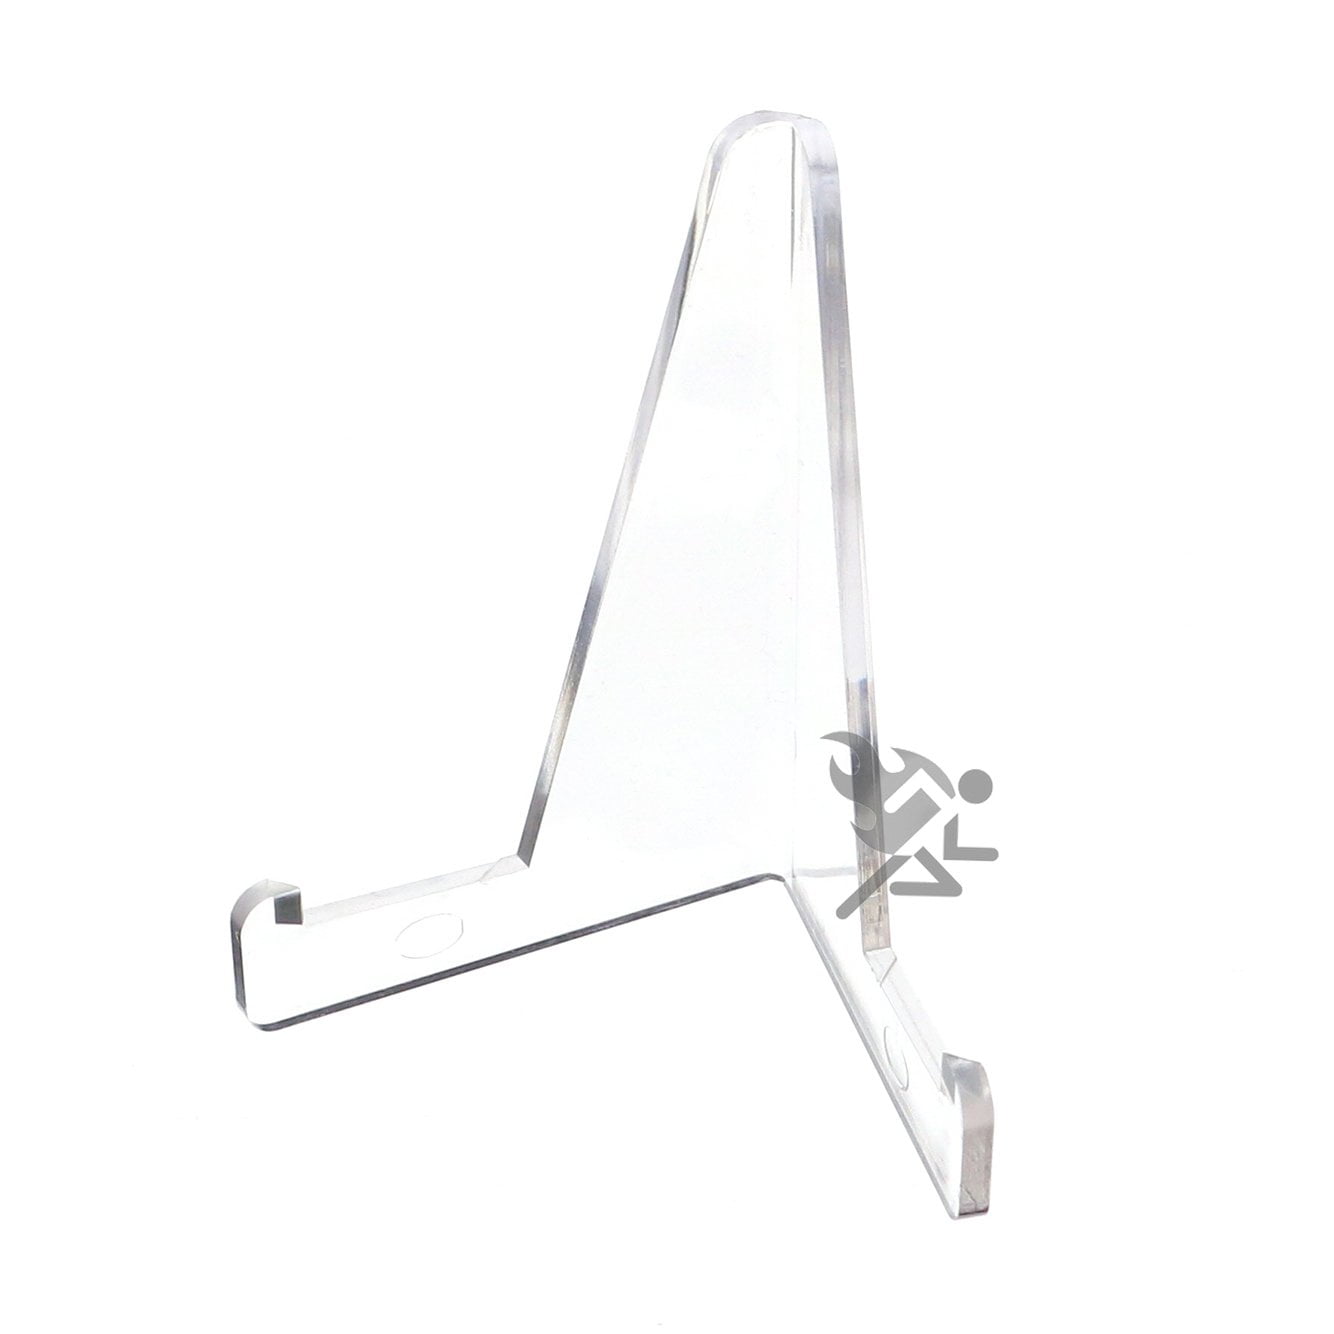 20 4-1/2" Clear Acrylic Slanted Display Stand Easel Qty 